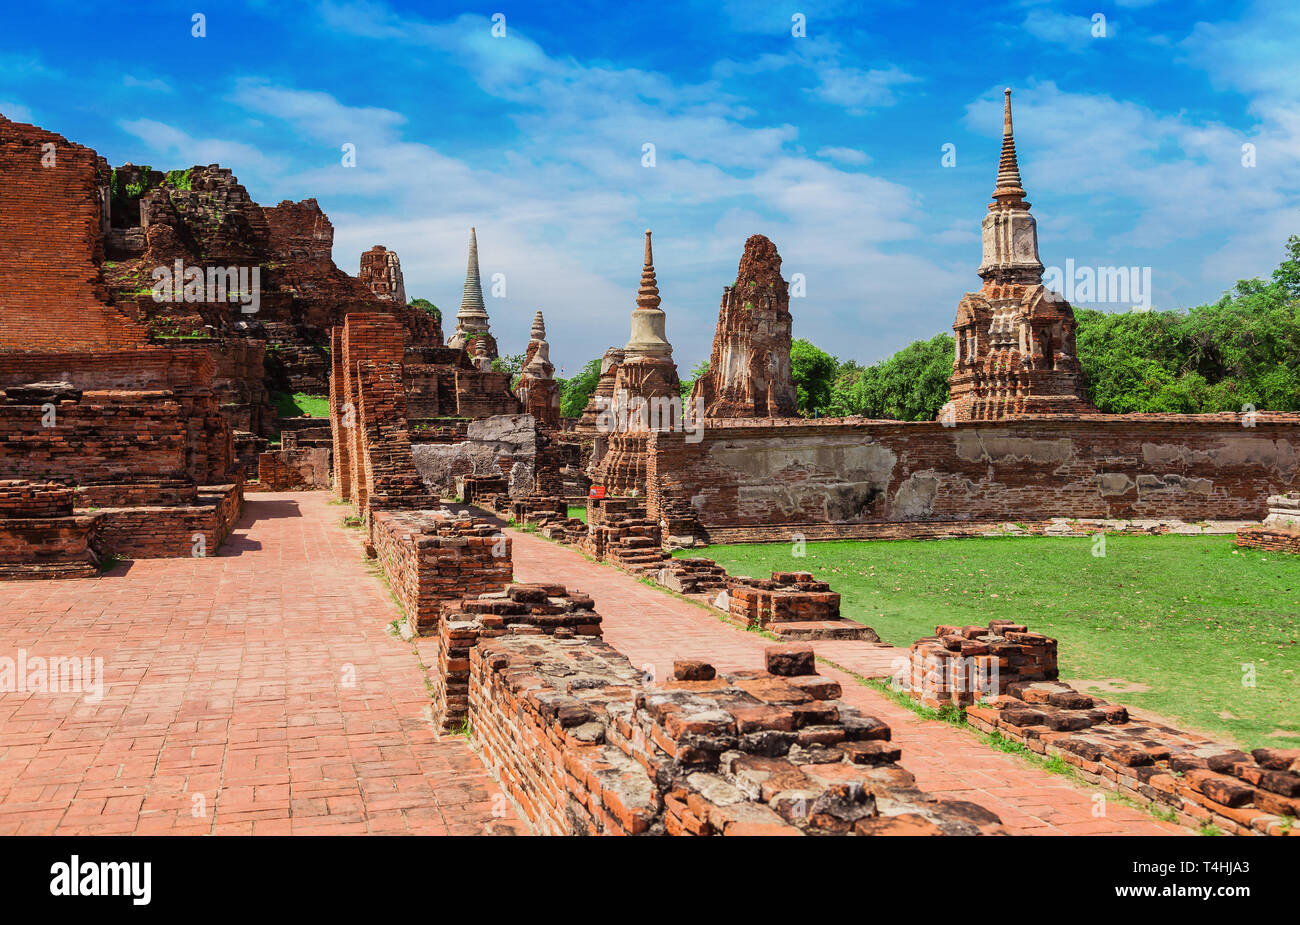 UNESCO World Heritage Site ancient temple in the former royal city of Ayutthaya Stock Photo